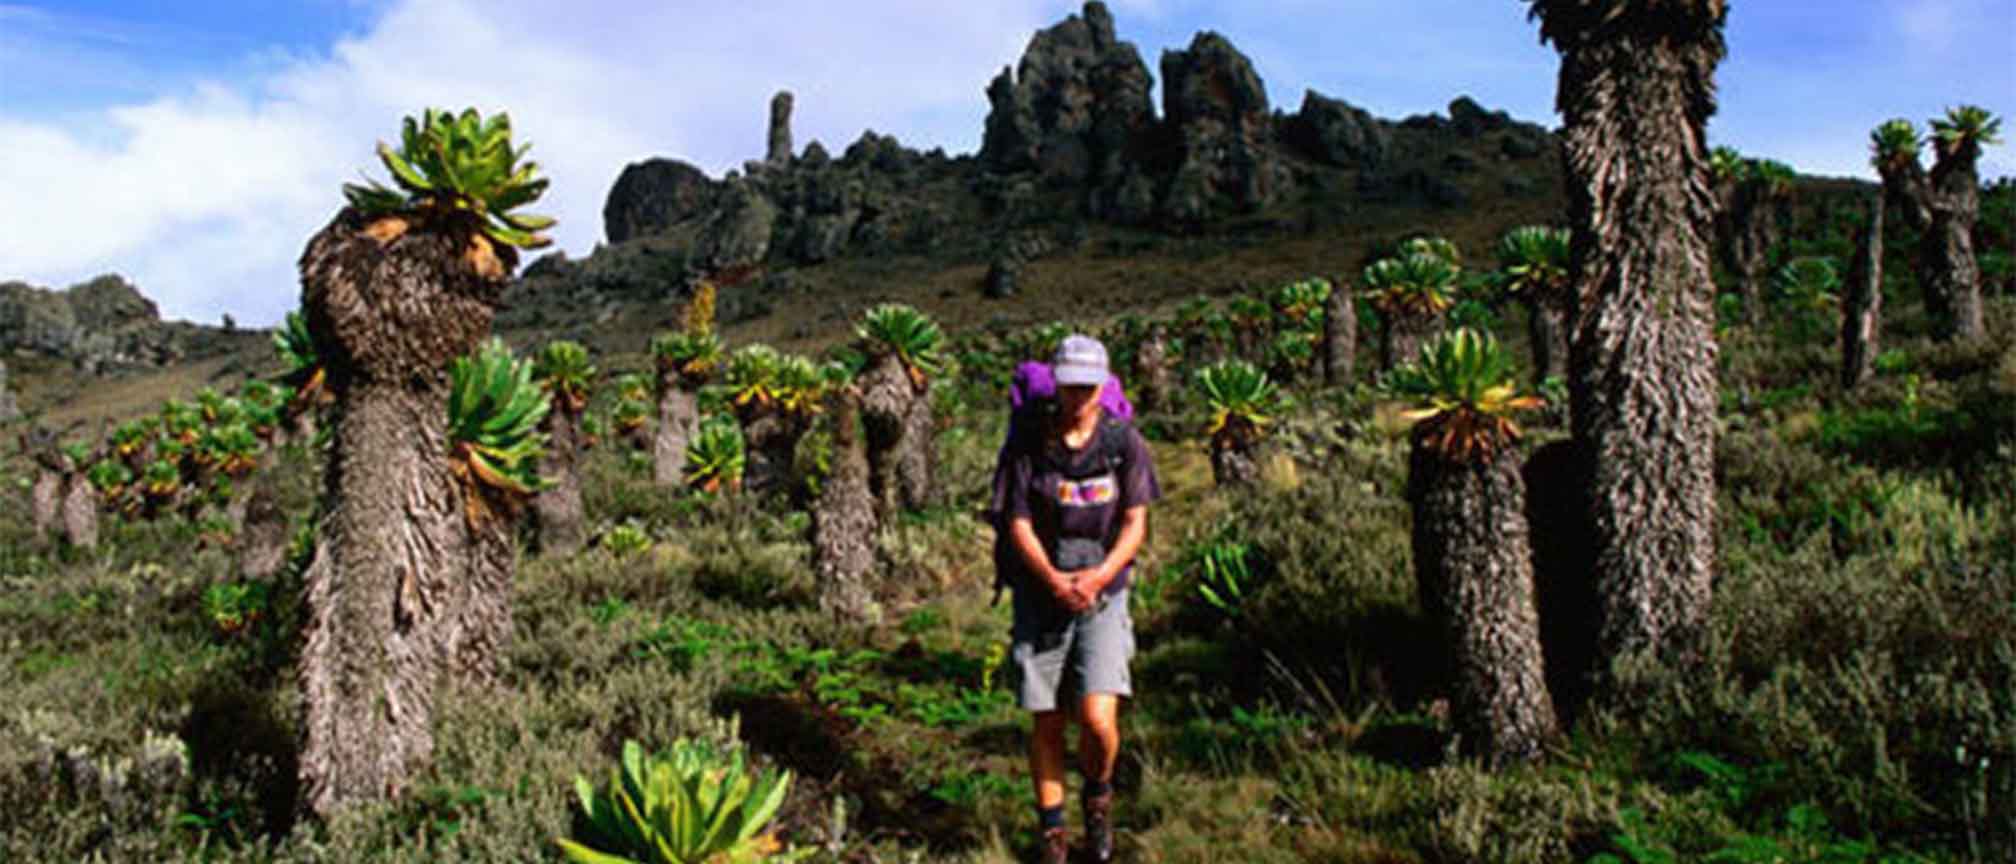 Activities at Mount Elgon National Park